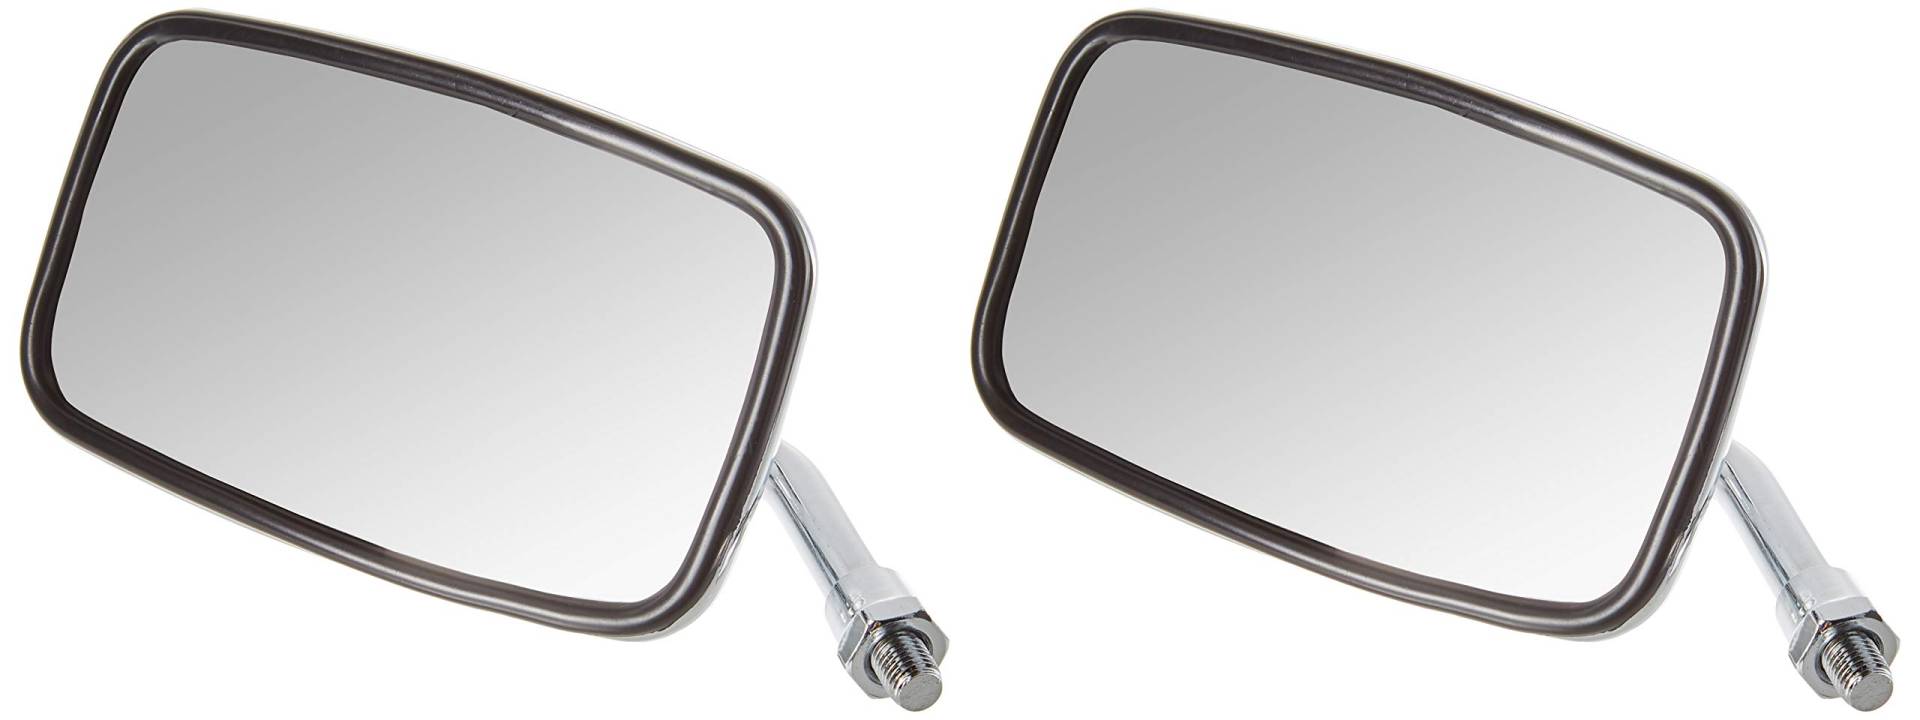 A-Pro Universal Mirrors Rearview Scooter Motorcycle Moped Motorbike Chrome M10 von A-Pro